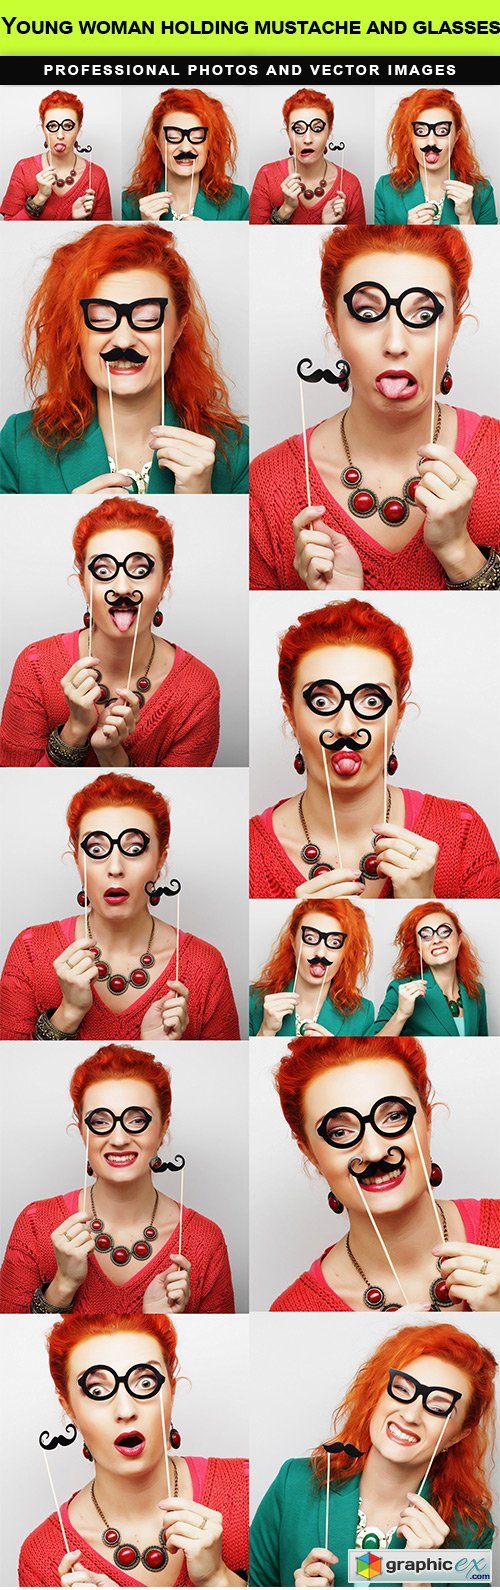 Young woman holding mustache and glasses